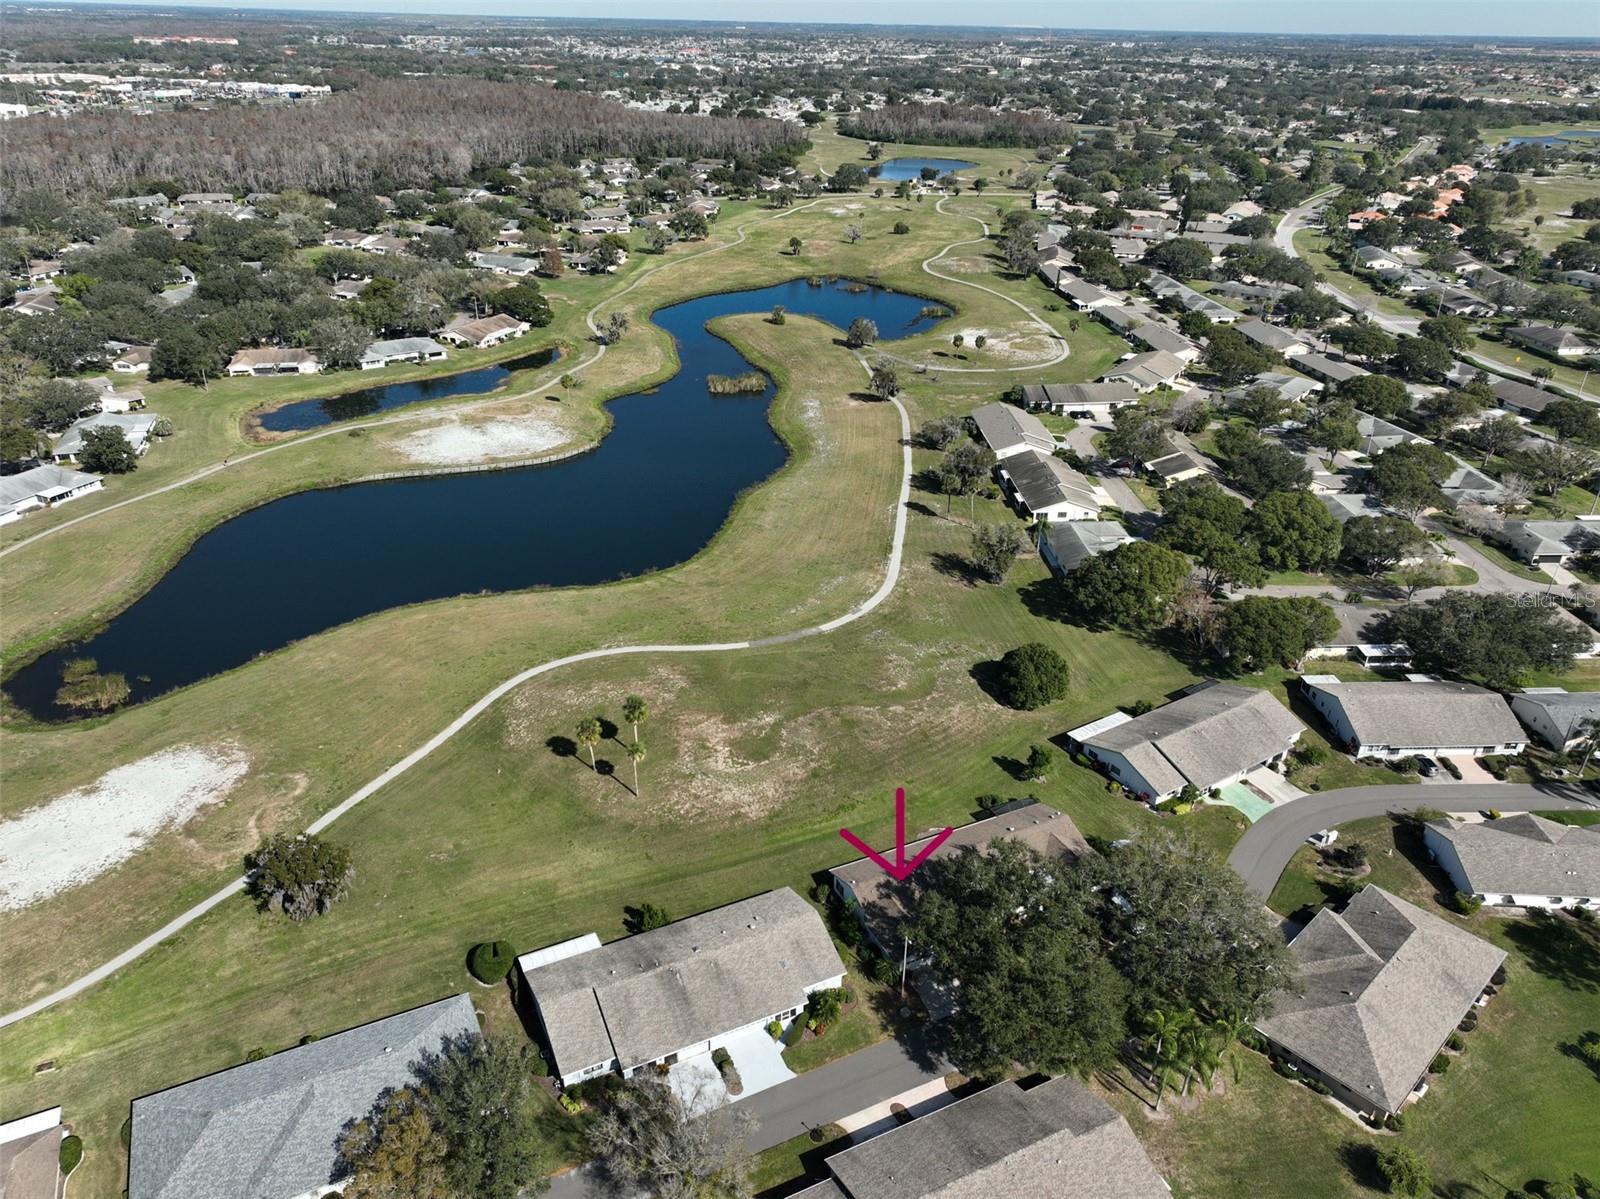 PRIVACY - No Backyard Neighbors! - Ariel view showing that the home is located on a retired golf course.  This neighborhood is known for its park-like feel, due to the vast green space between the homes, large trees and park benches.